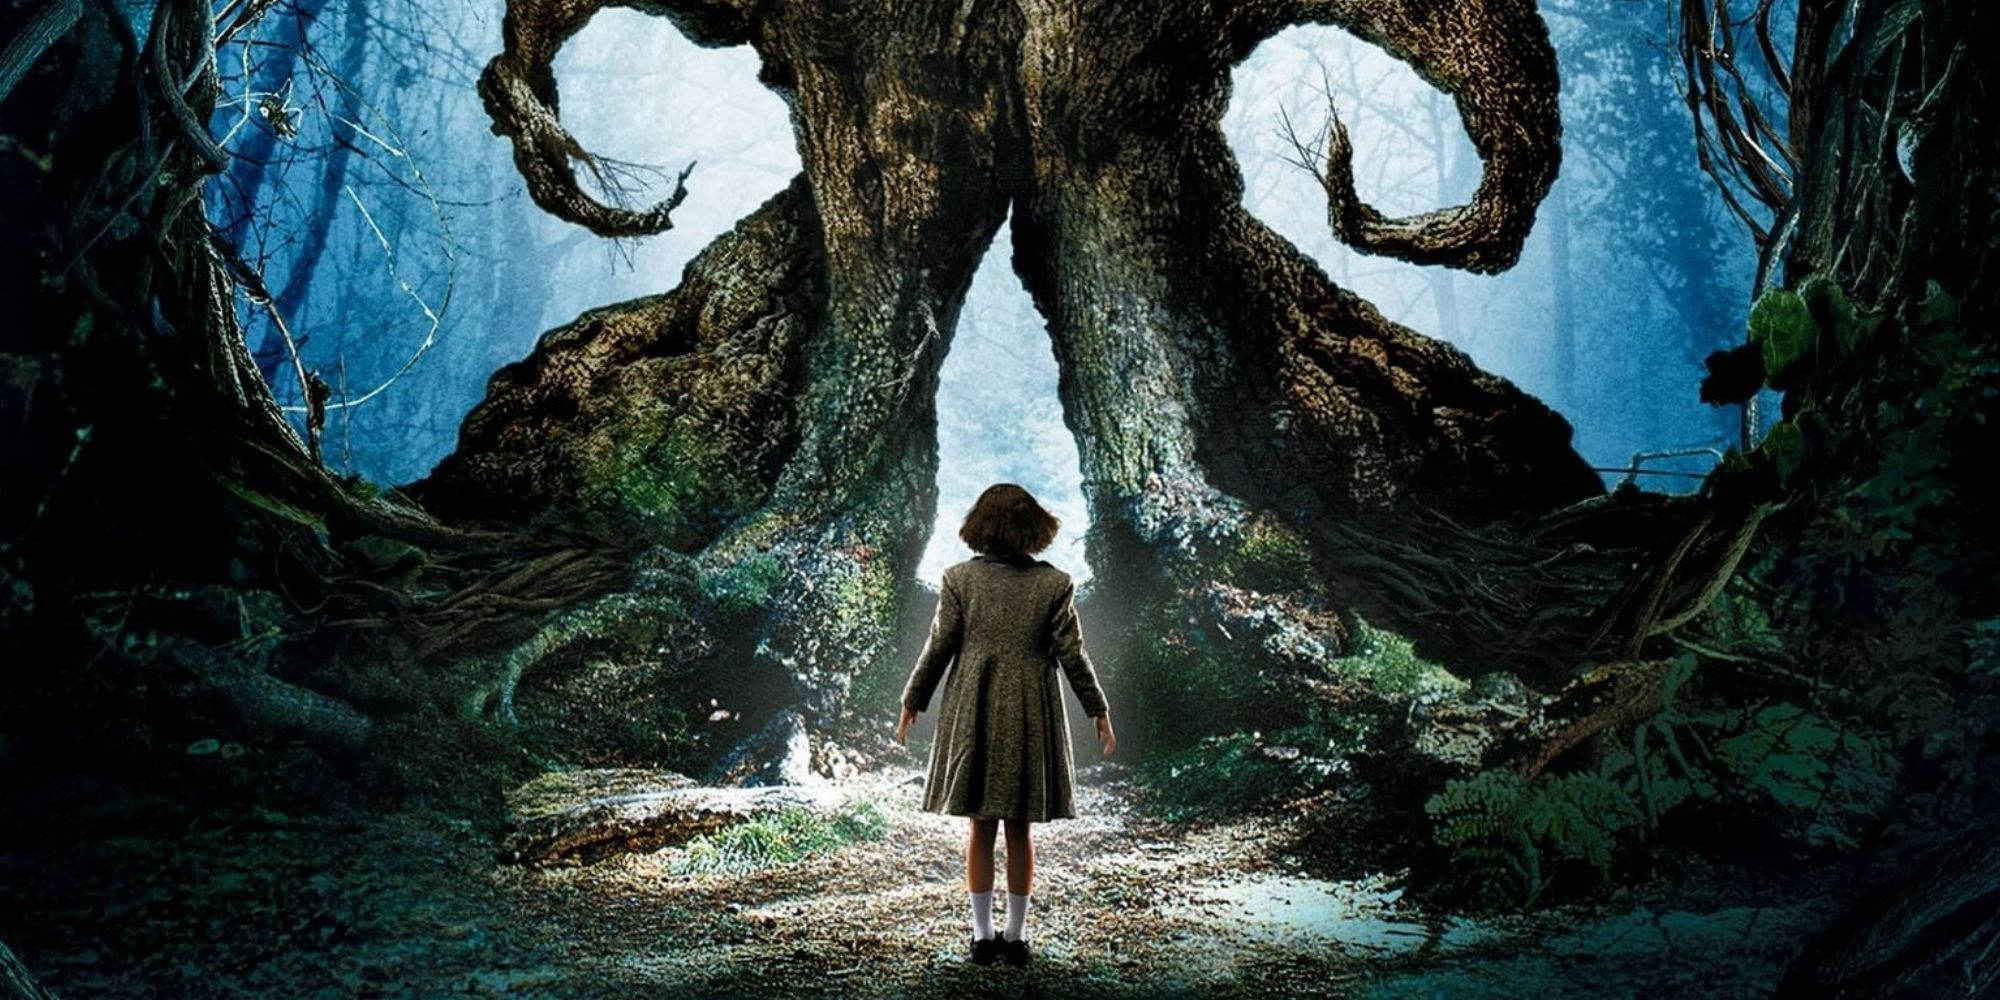 Promotional image showing Ofelia and a tree in 'Pan's Labyrinth'